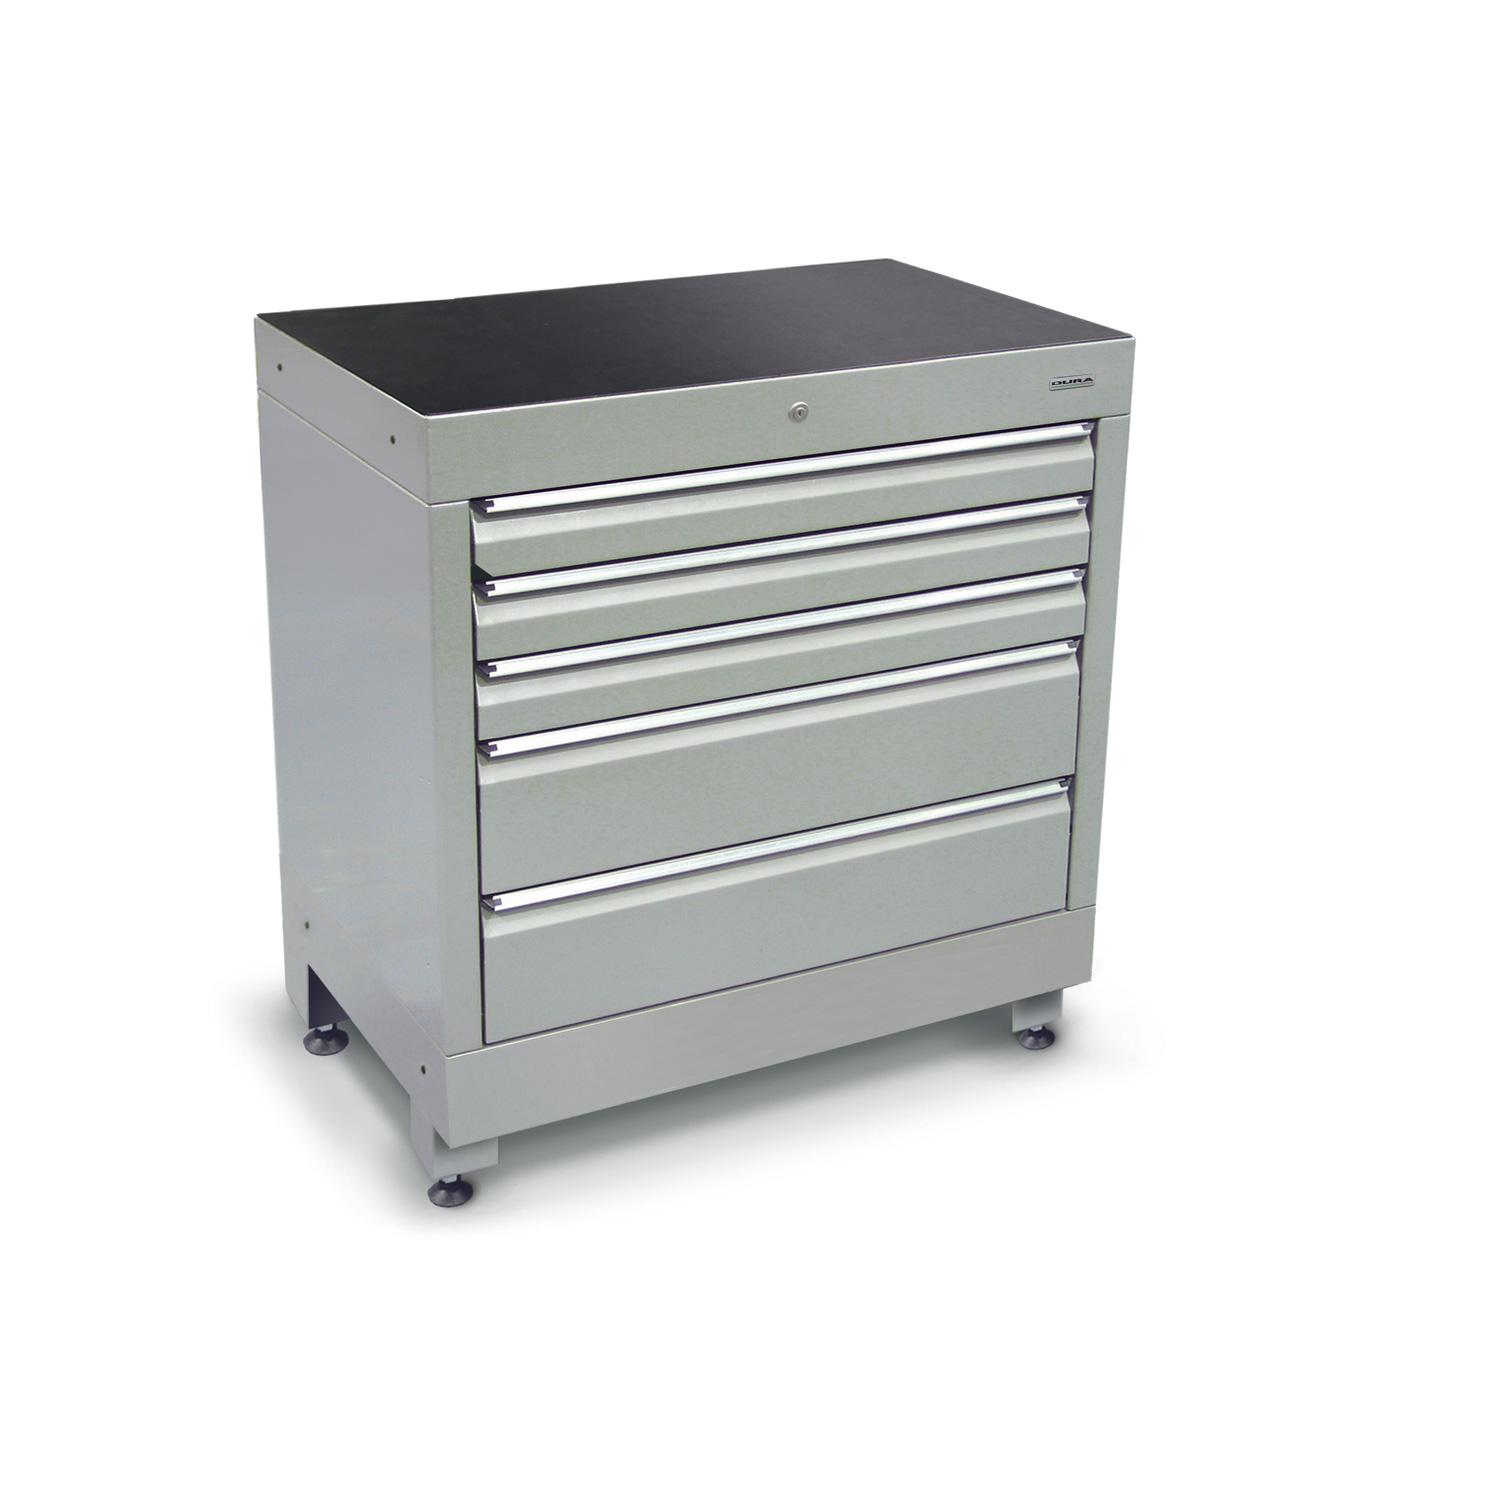 900 series tool cabinet with an additional inner sliding tray (5 drawers)